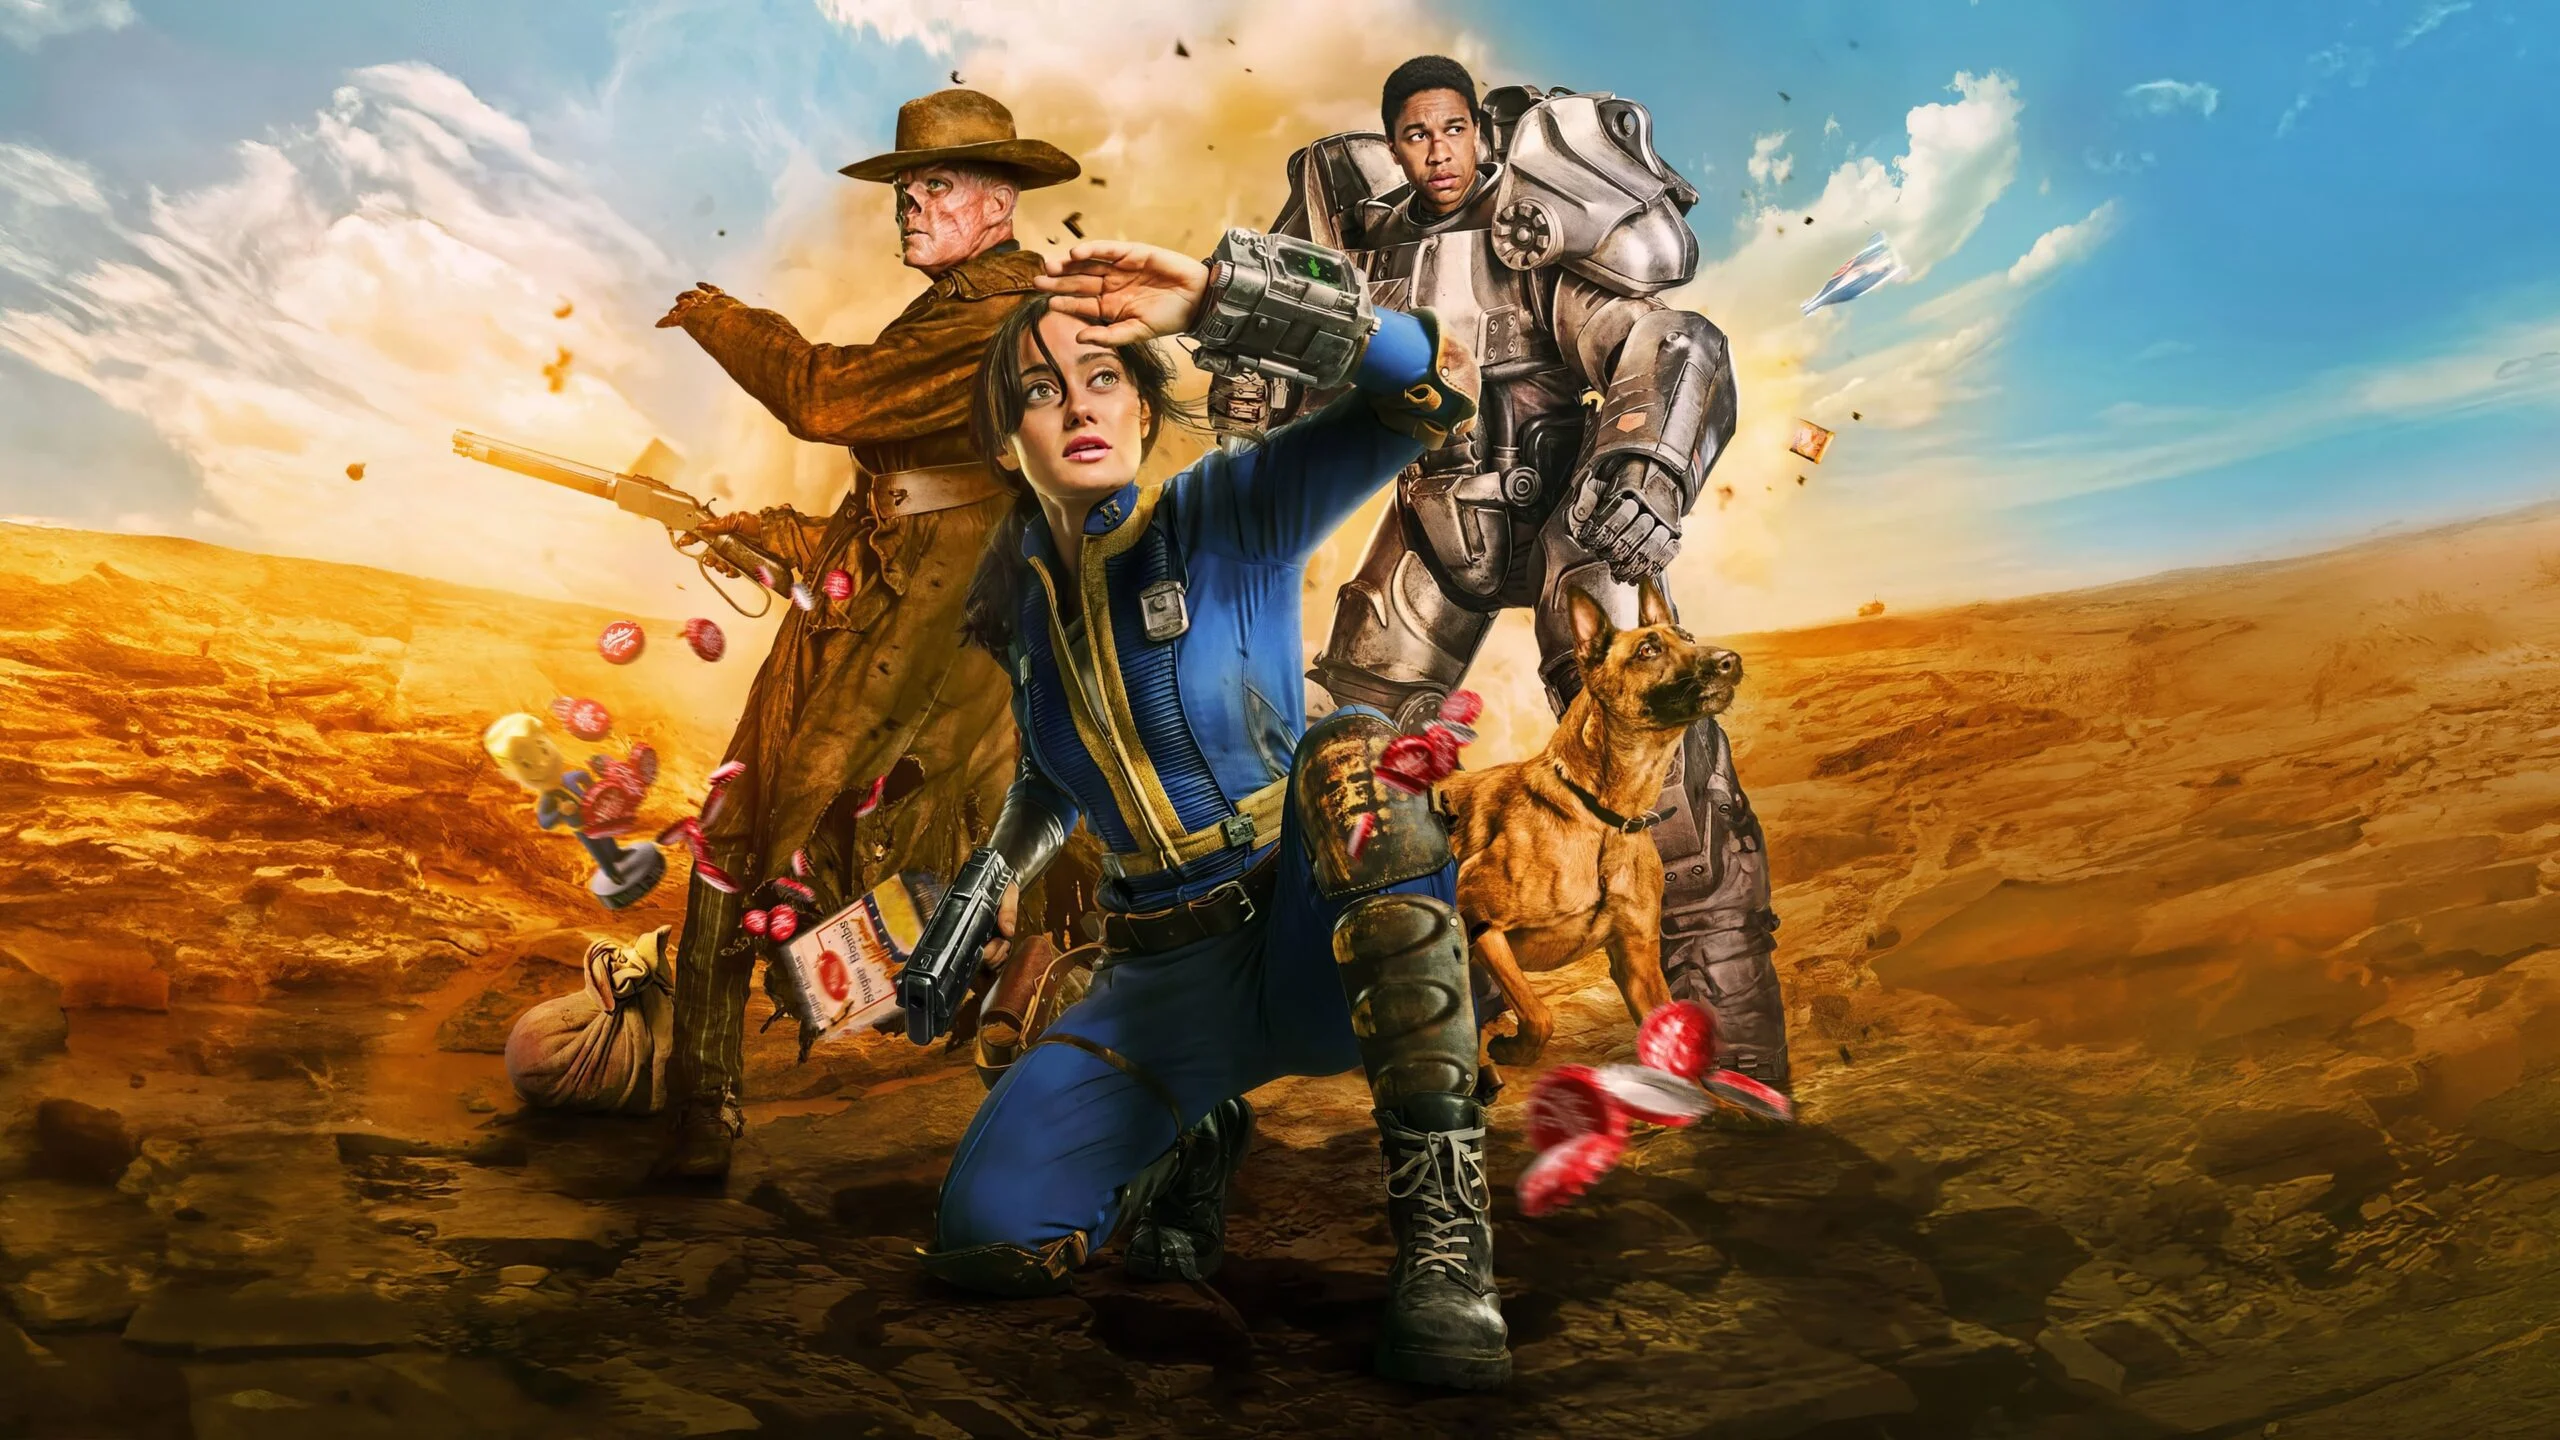 The Fallout series has already been watched by 80 million viewers. The premiere took place a month ago